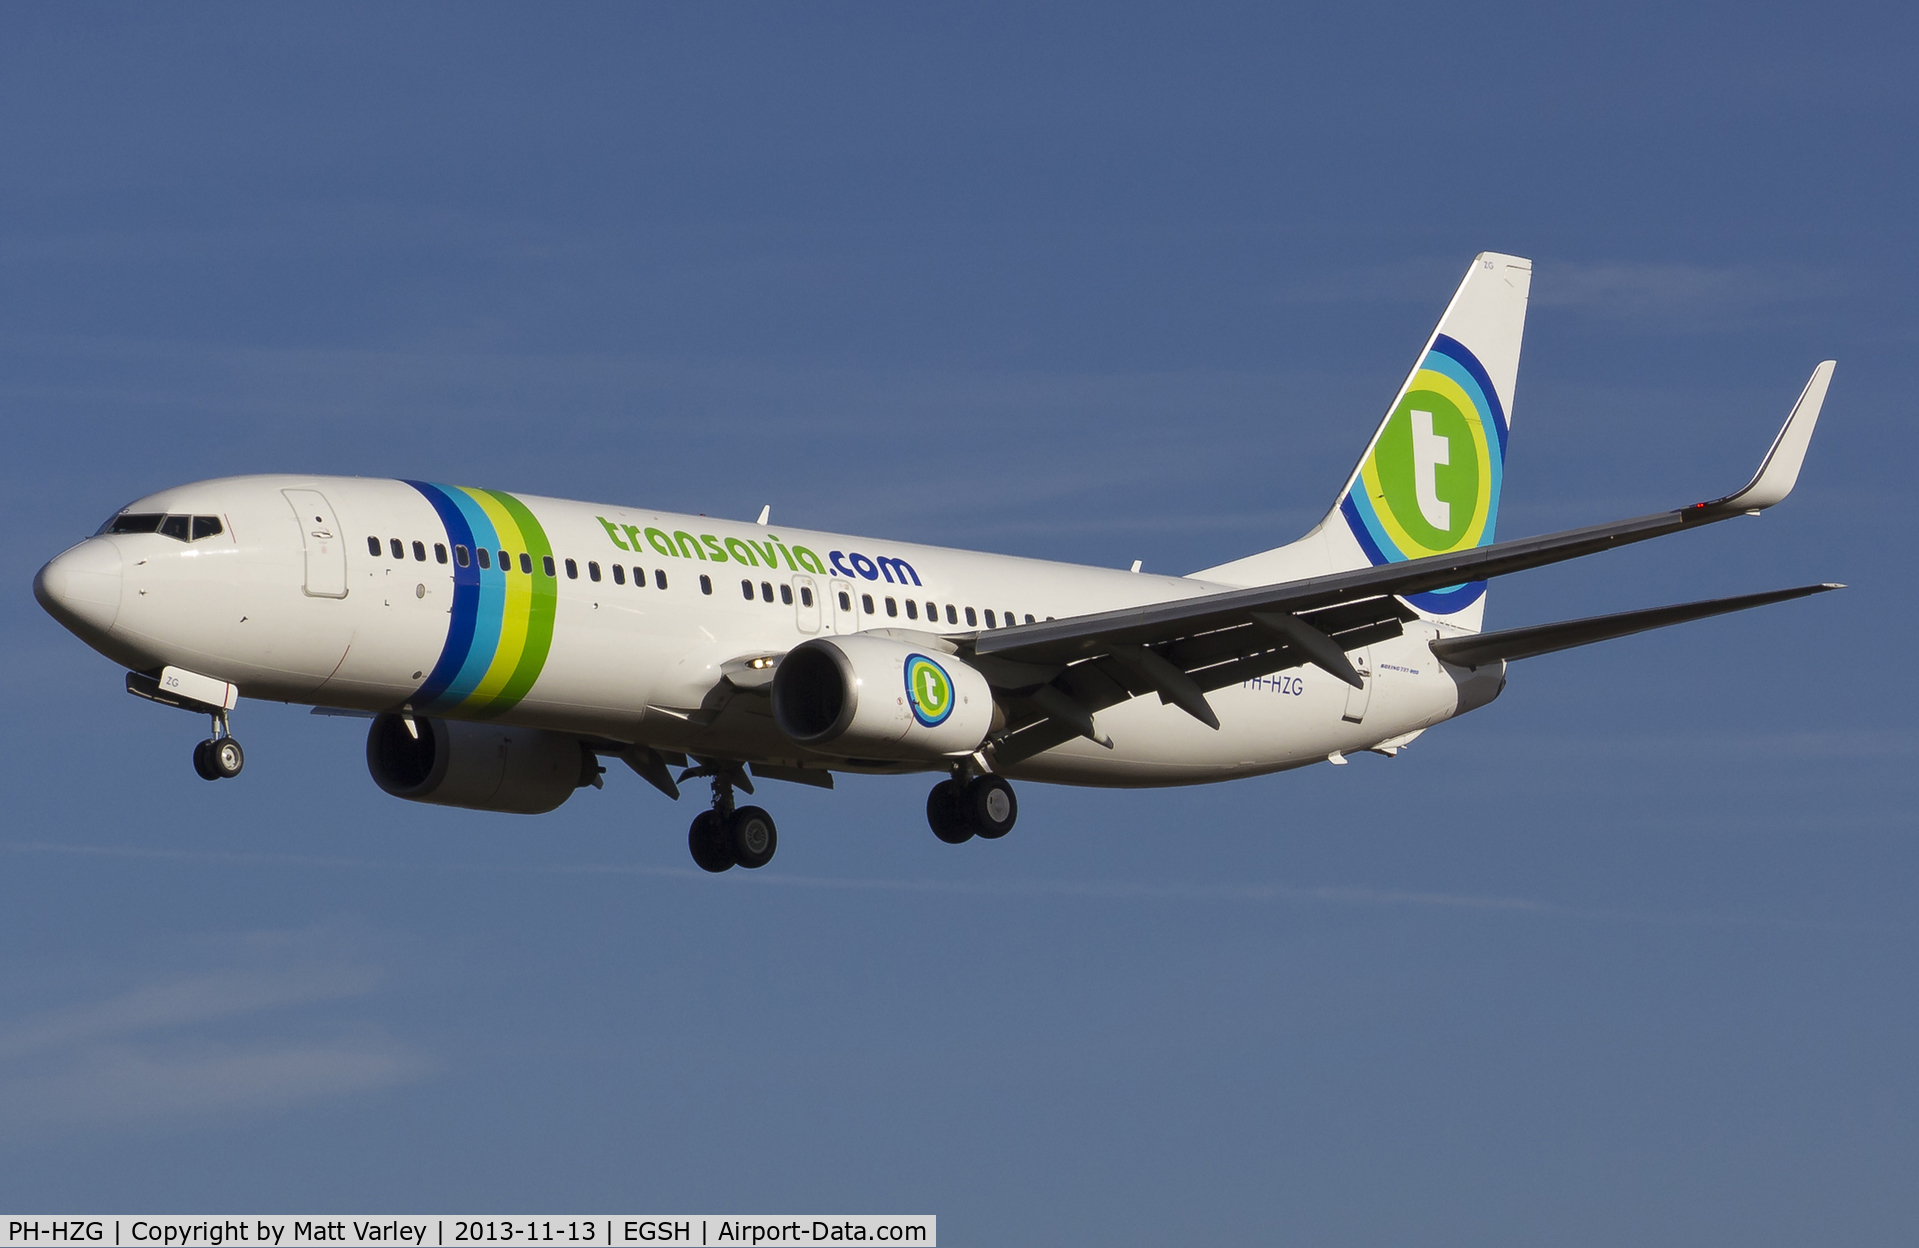 PH-HZG, 2000 Boeing 737-8K2 C/N 28379, Arriving at NWI after an air test...